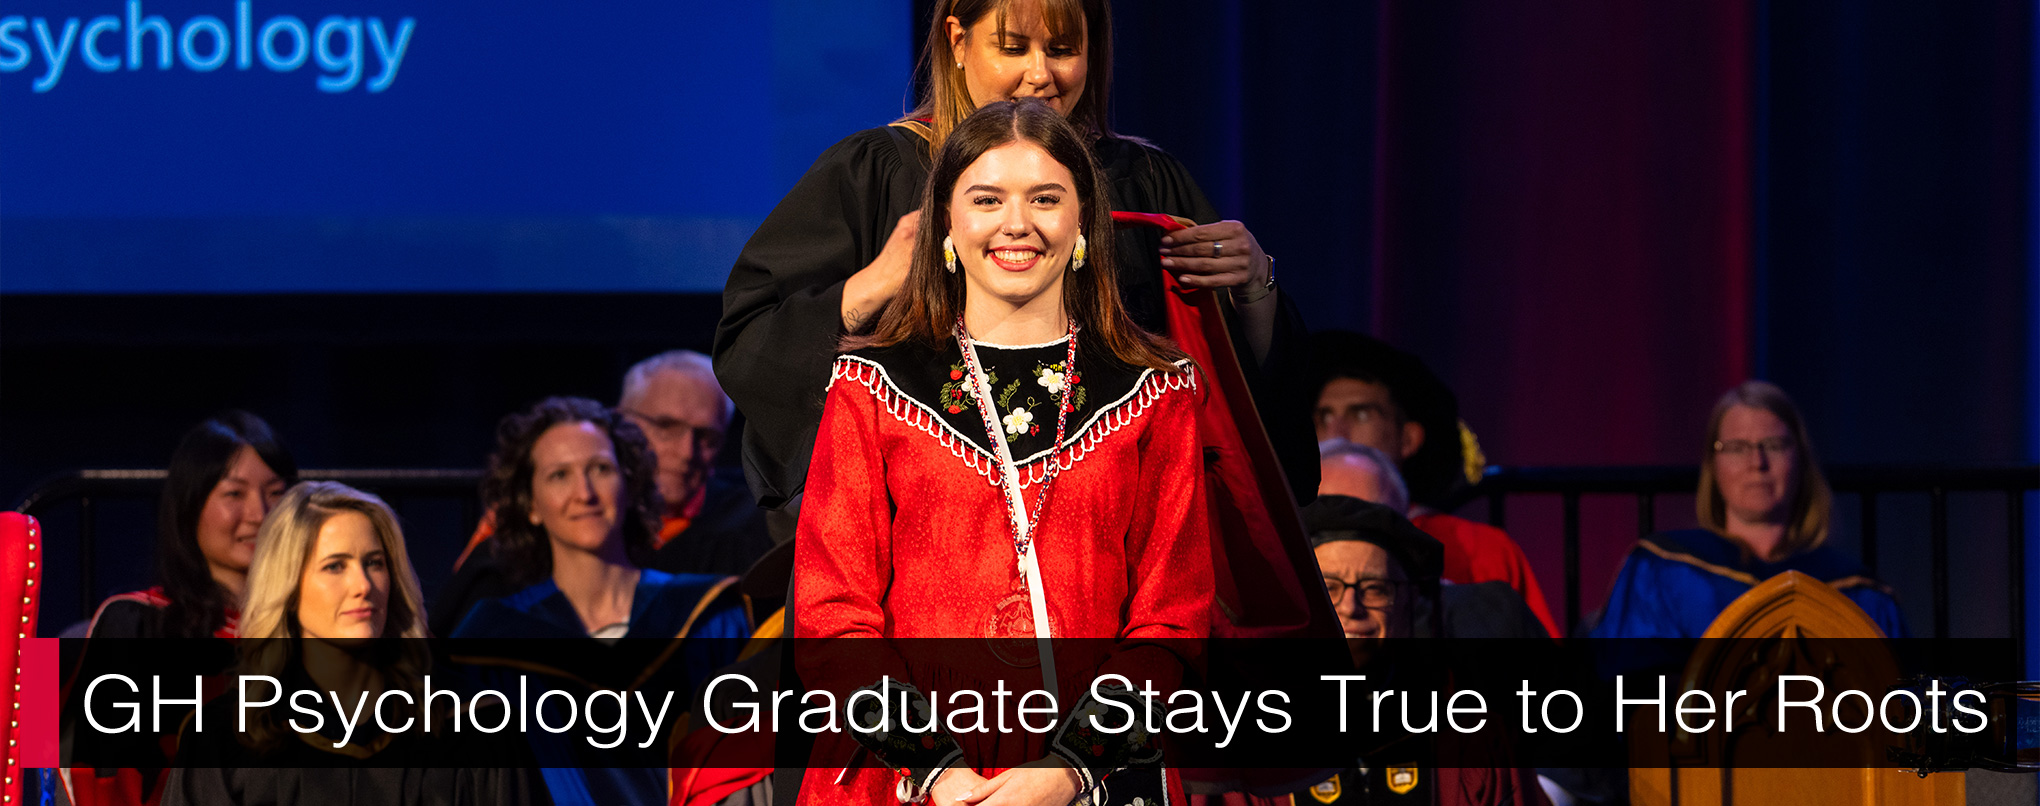 Kristen Brant in traditional Indigenous clothing smiling while waiting for someone to put the University of Guelph-Humber convocation hood over her. There are people in convocation regalia sitting behind, watching. Text reads, 